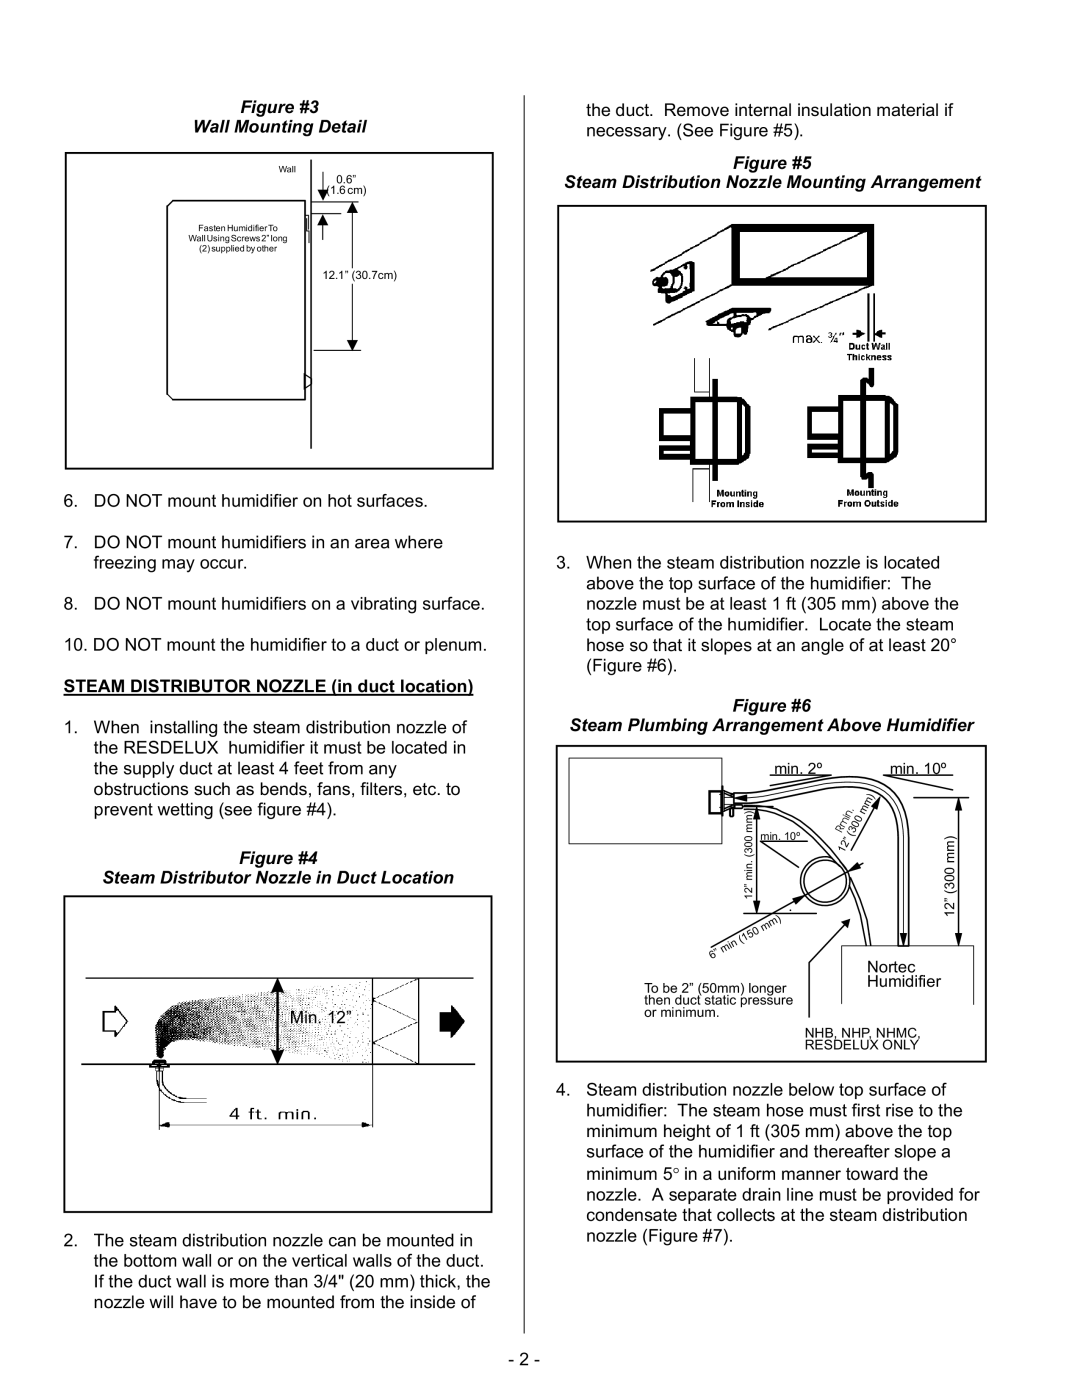 Nortec Steam Humidifiers manual Figure #3 Wall Mounting Detail, Figure #5, Steam Distribution Nozzle Mounting Arrangement 